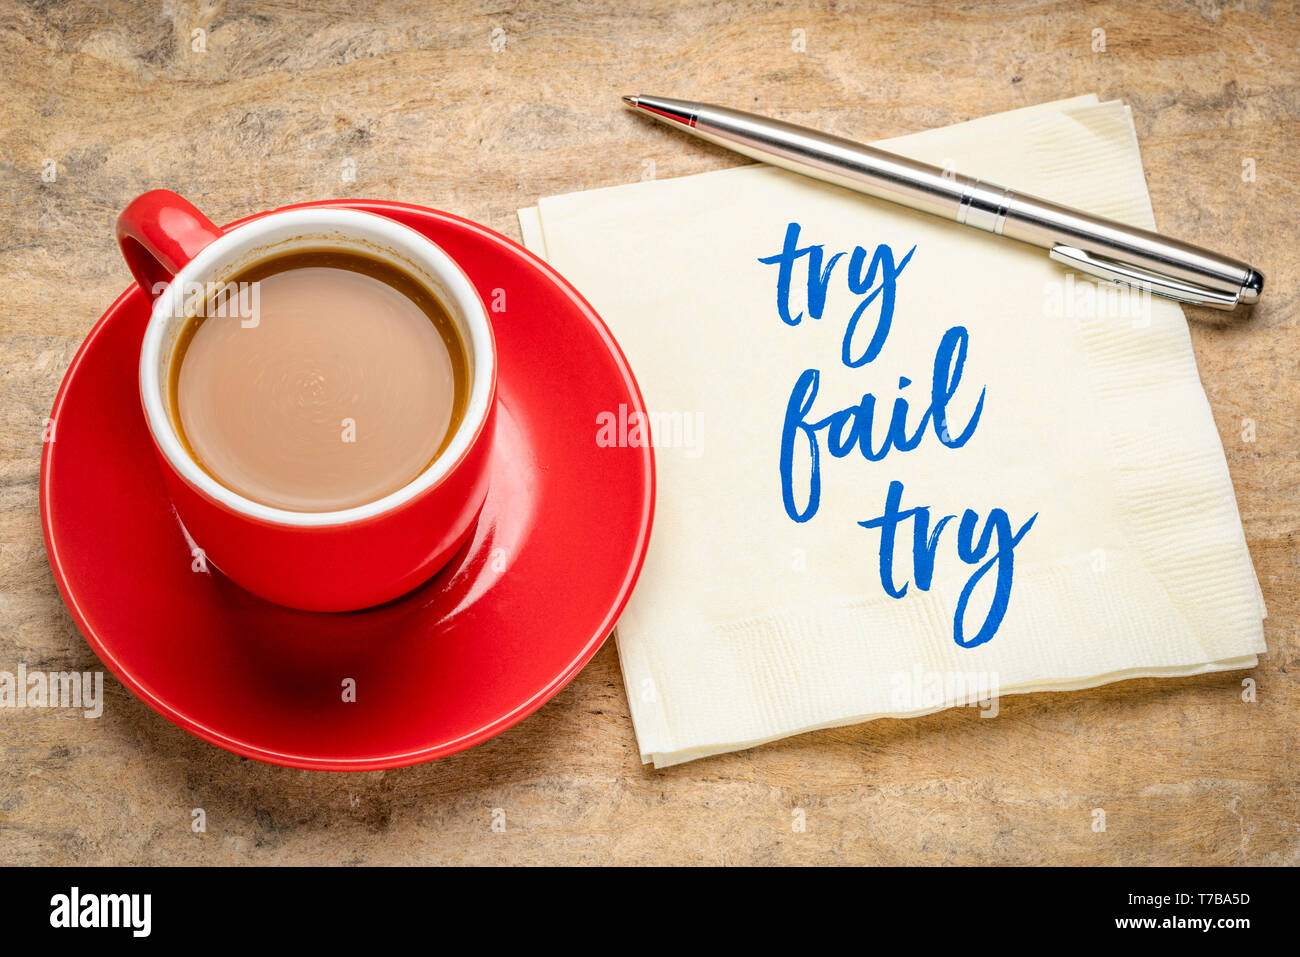 try, fail and try again concept - handwriting on napkin with a cup of coffee Stock Photo